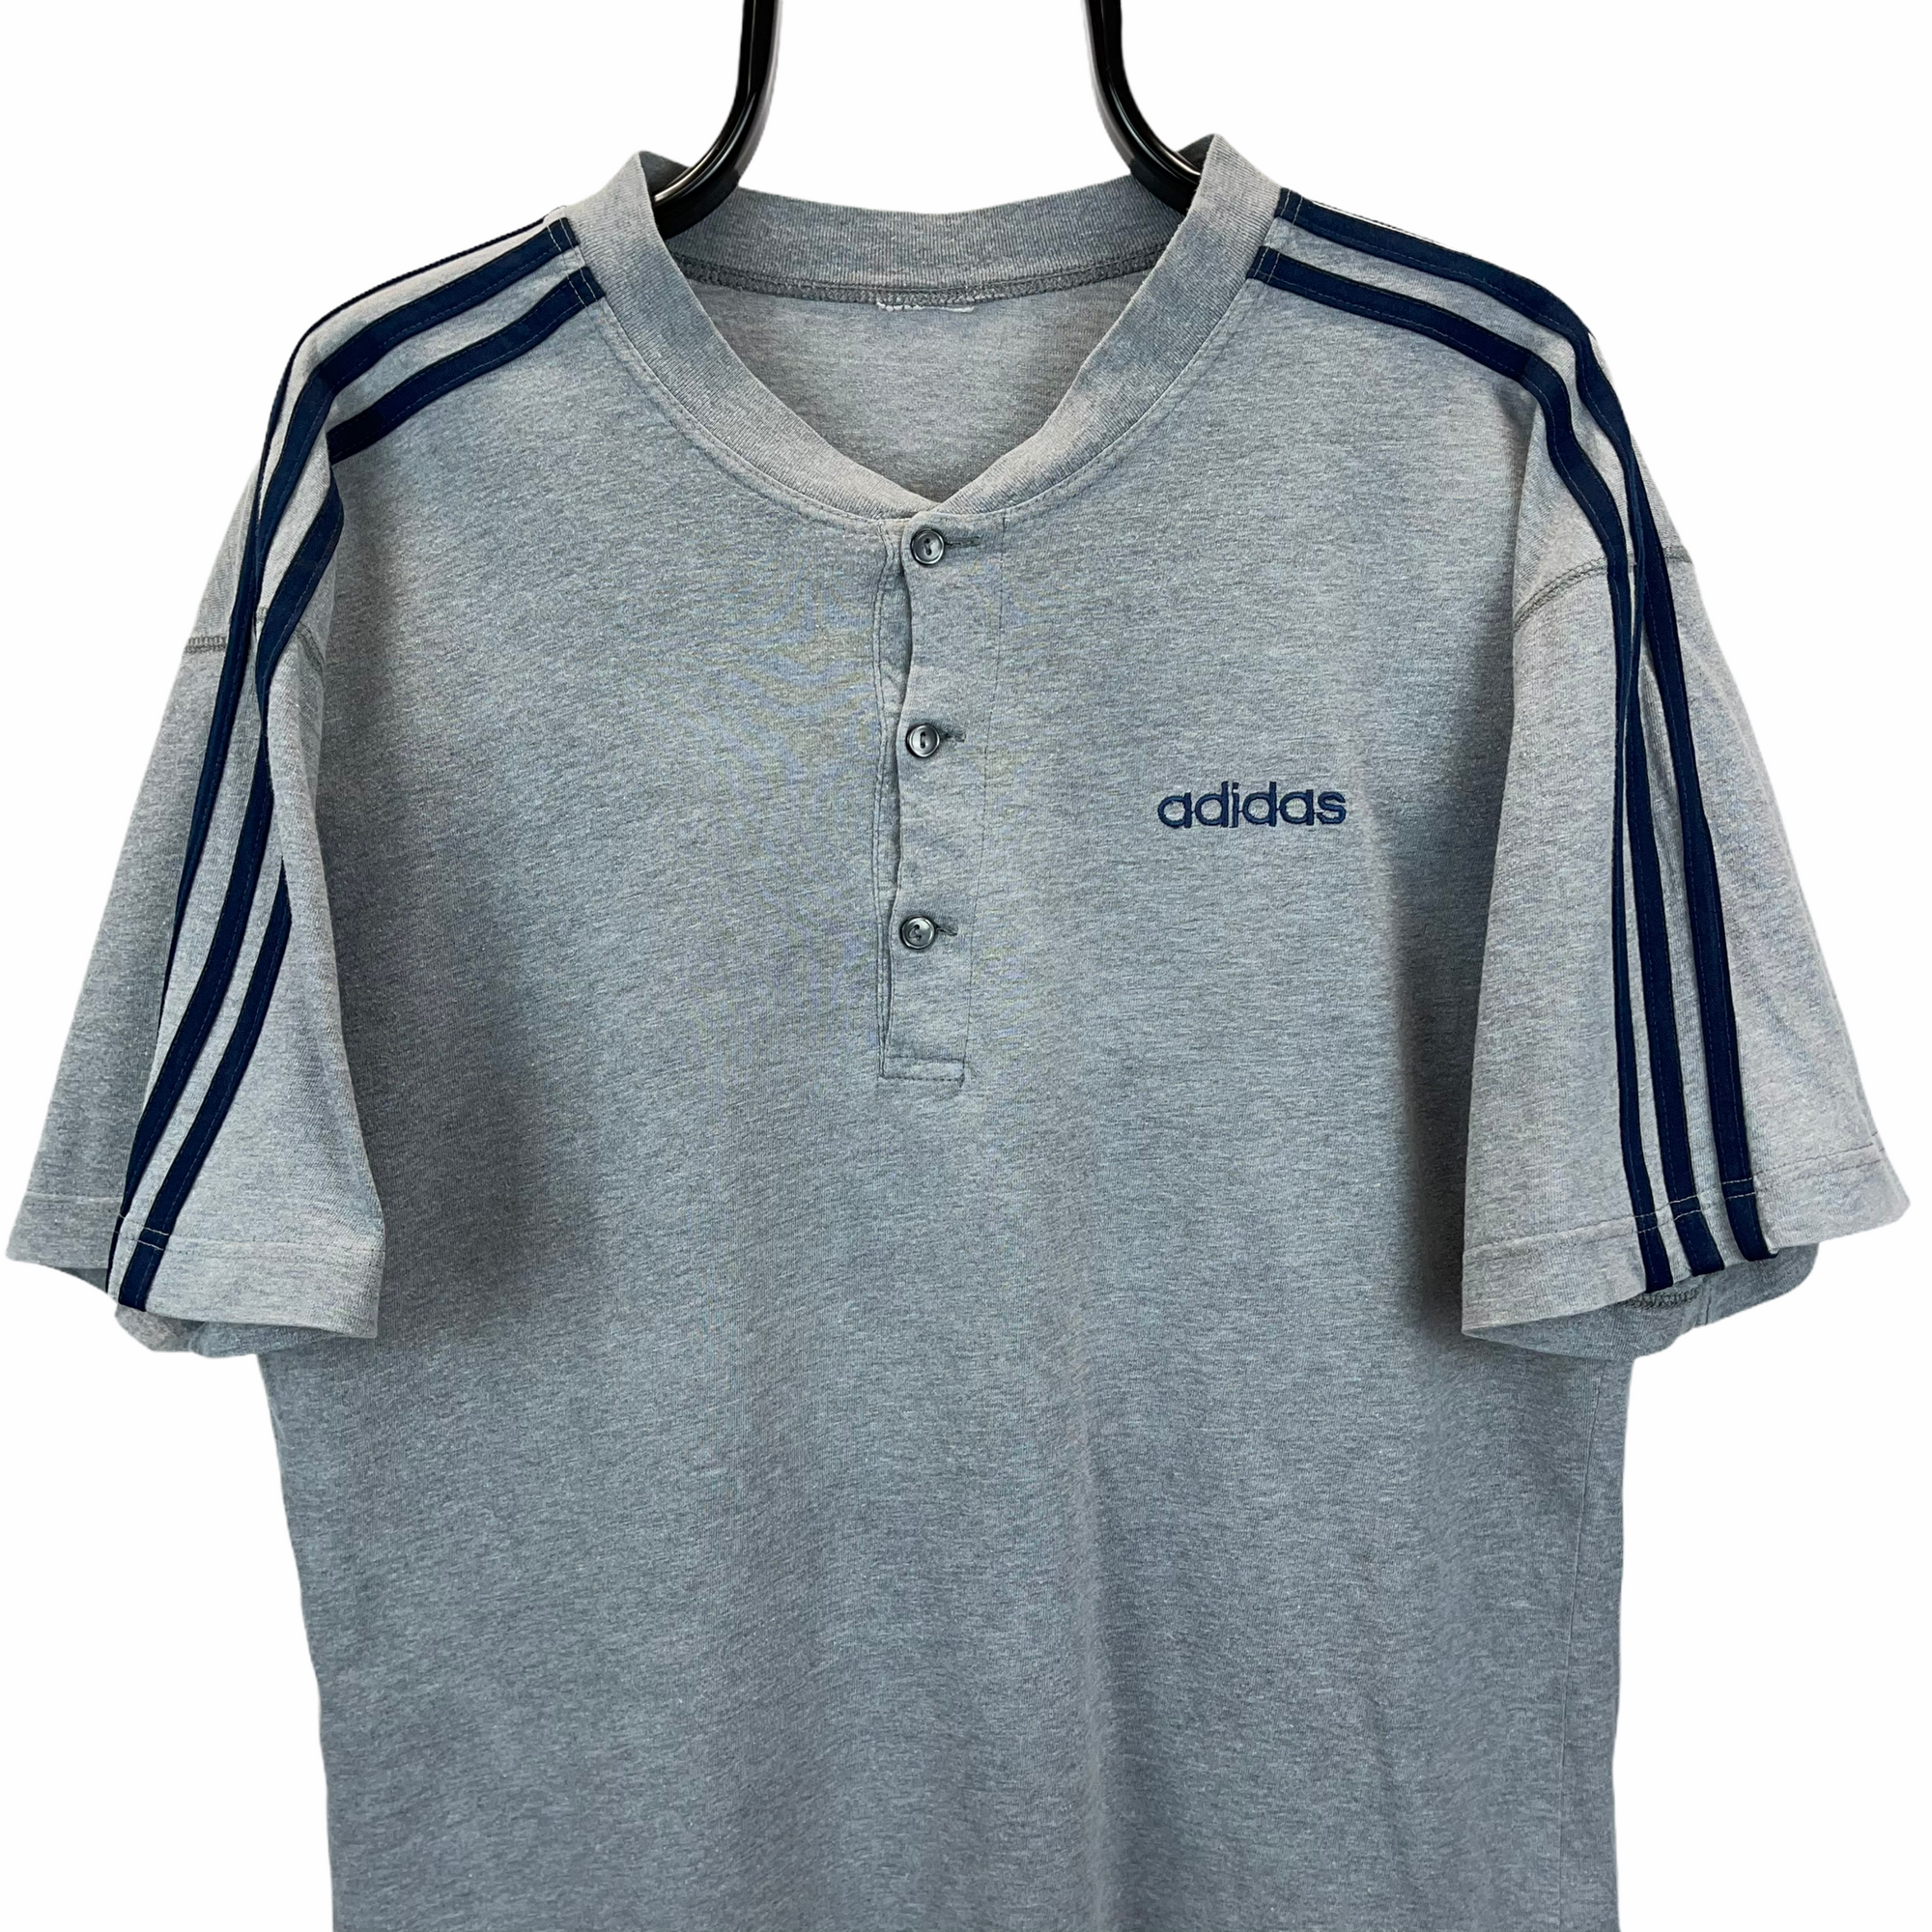 VINTAGE 80S ADIDAS BUTTON UP TEE IN GREY & NAVY - MEN'S LARGE/WOMEN'S XL